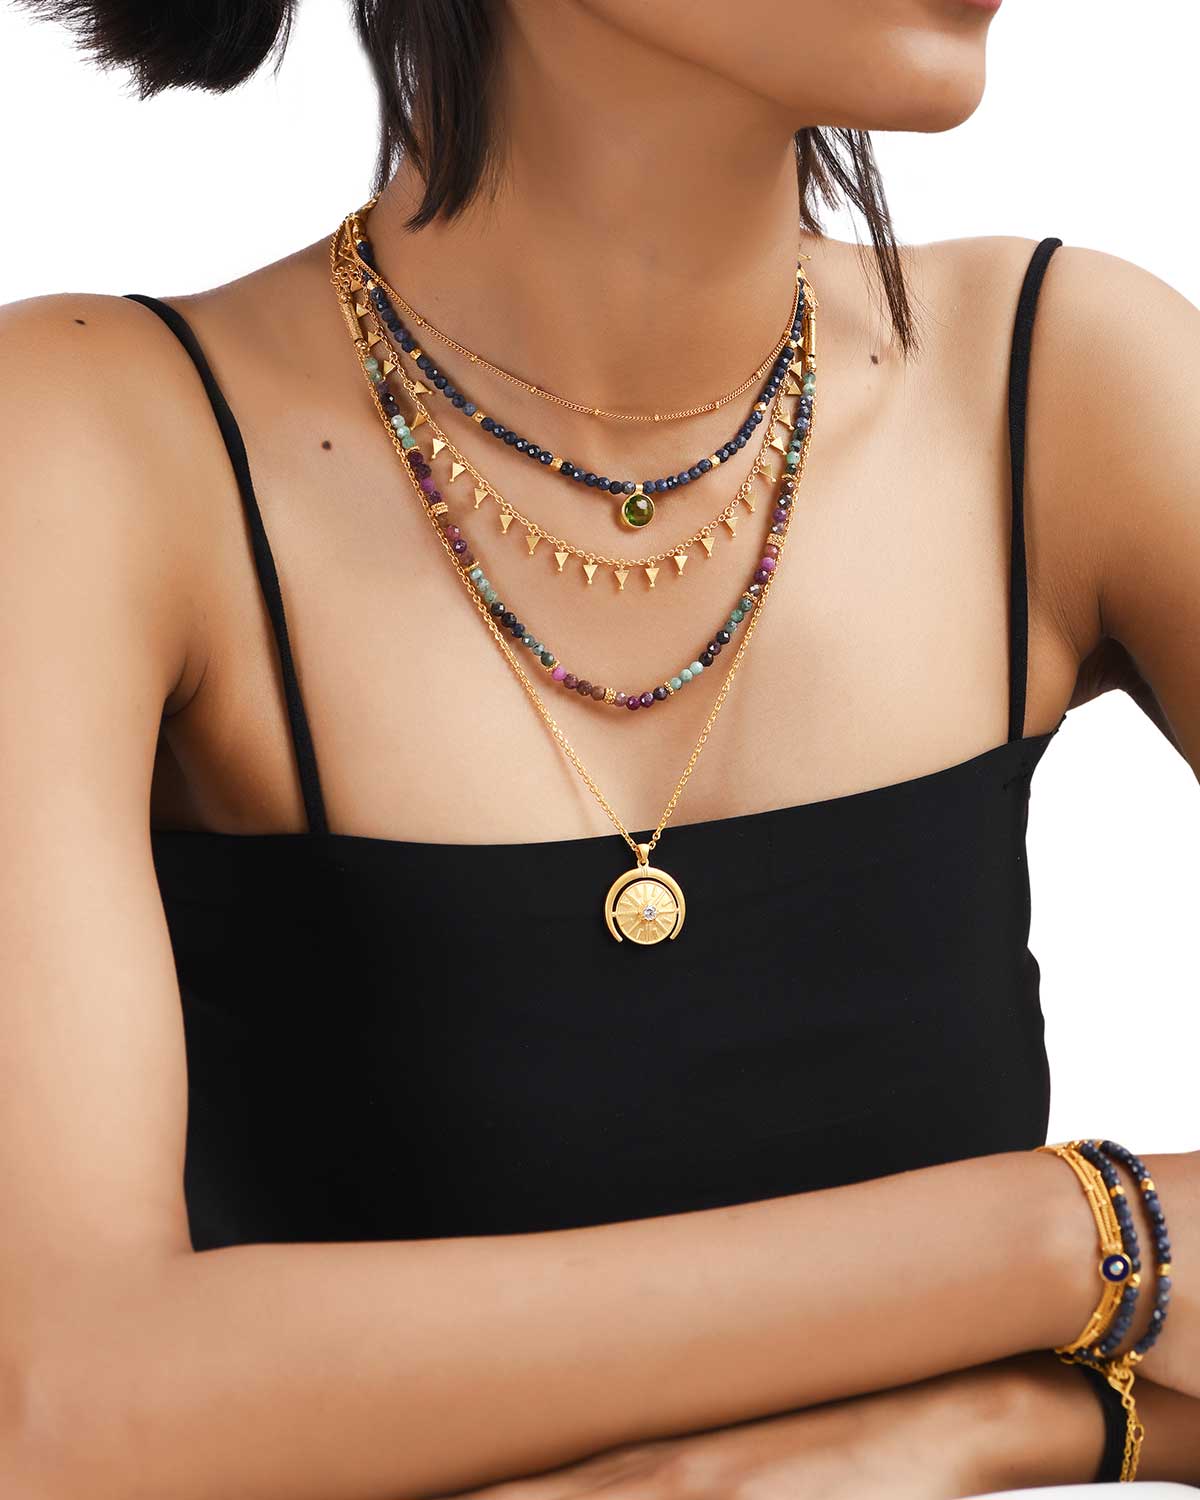 A model wearing many kind of women's jewellery in Gold necklaces